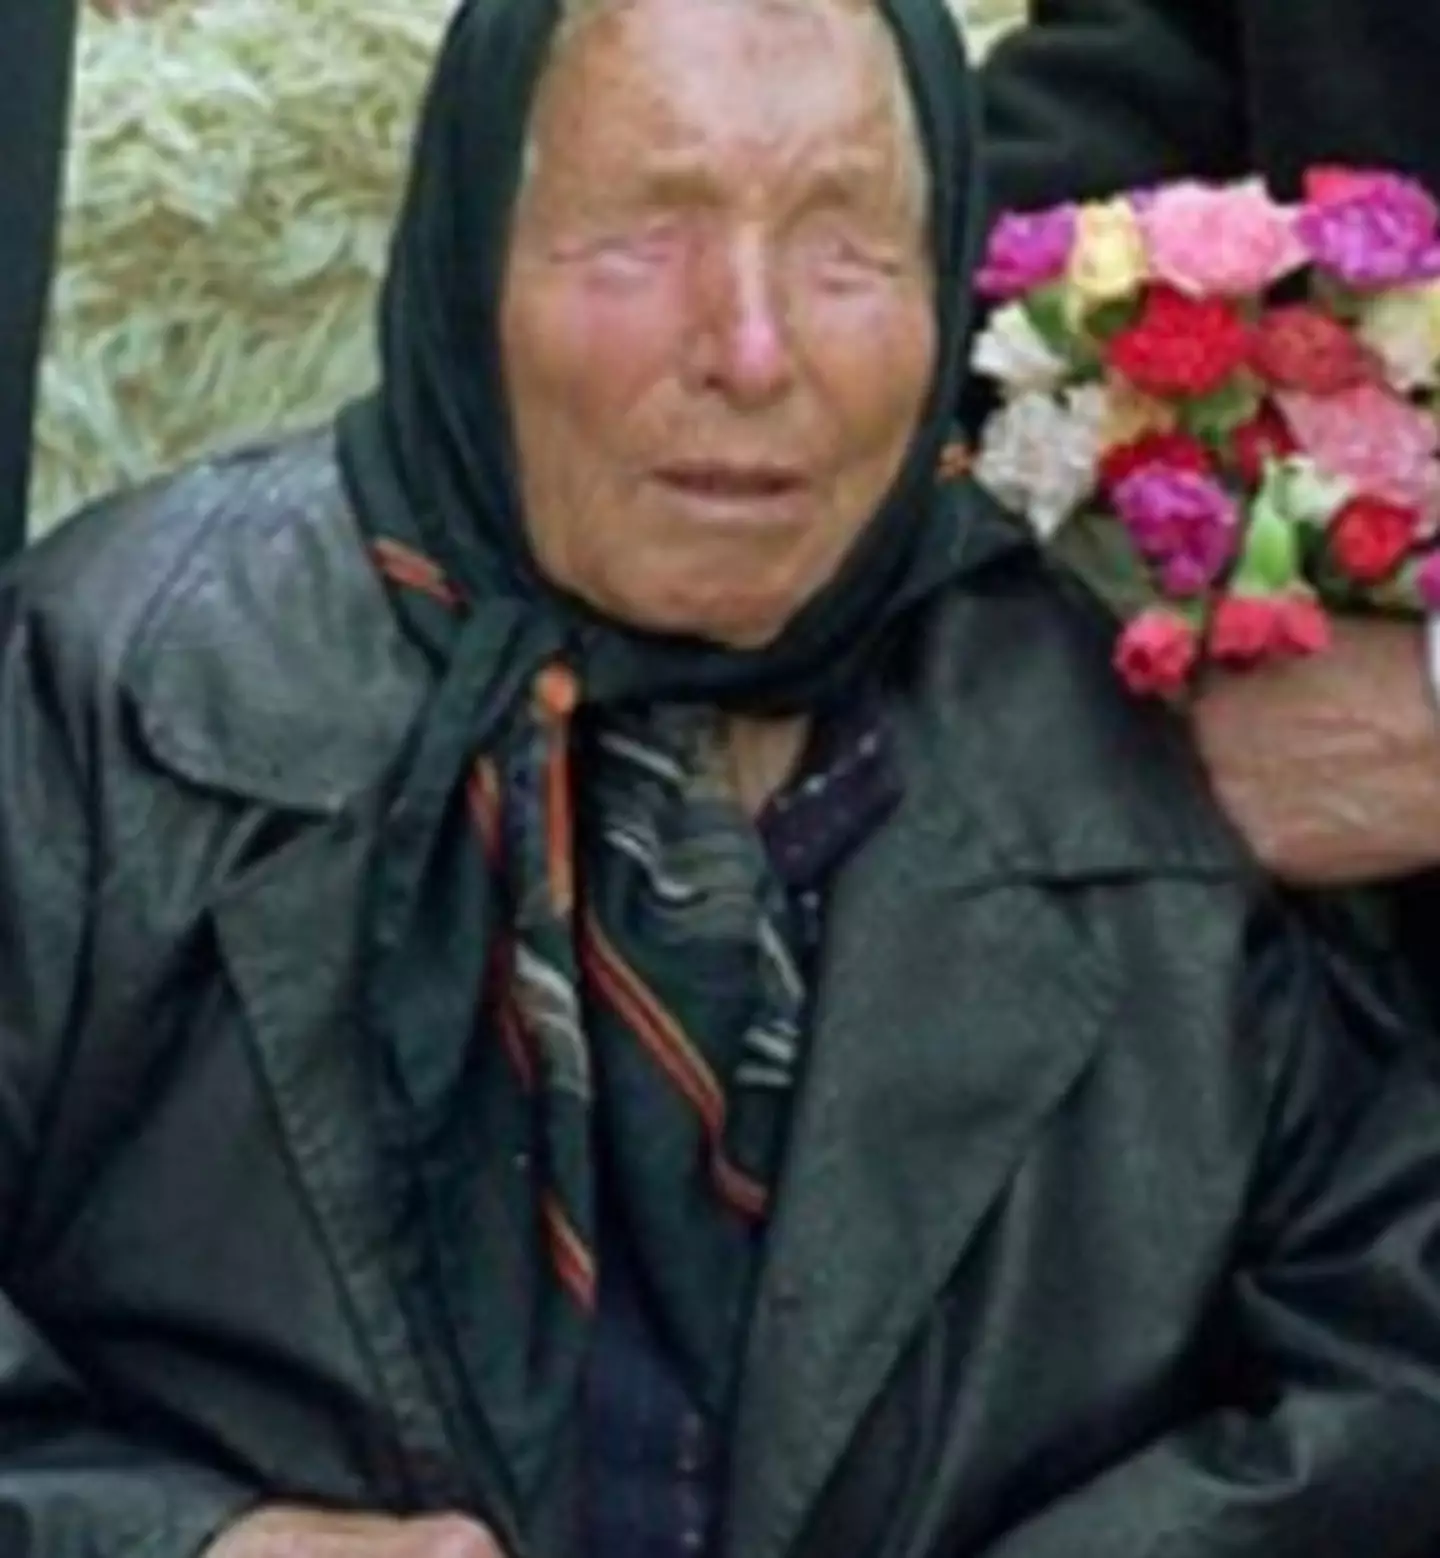 The late Baba Vanga has previously predicted major global events. (Facebook)